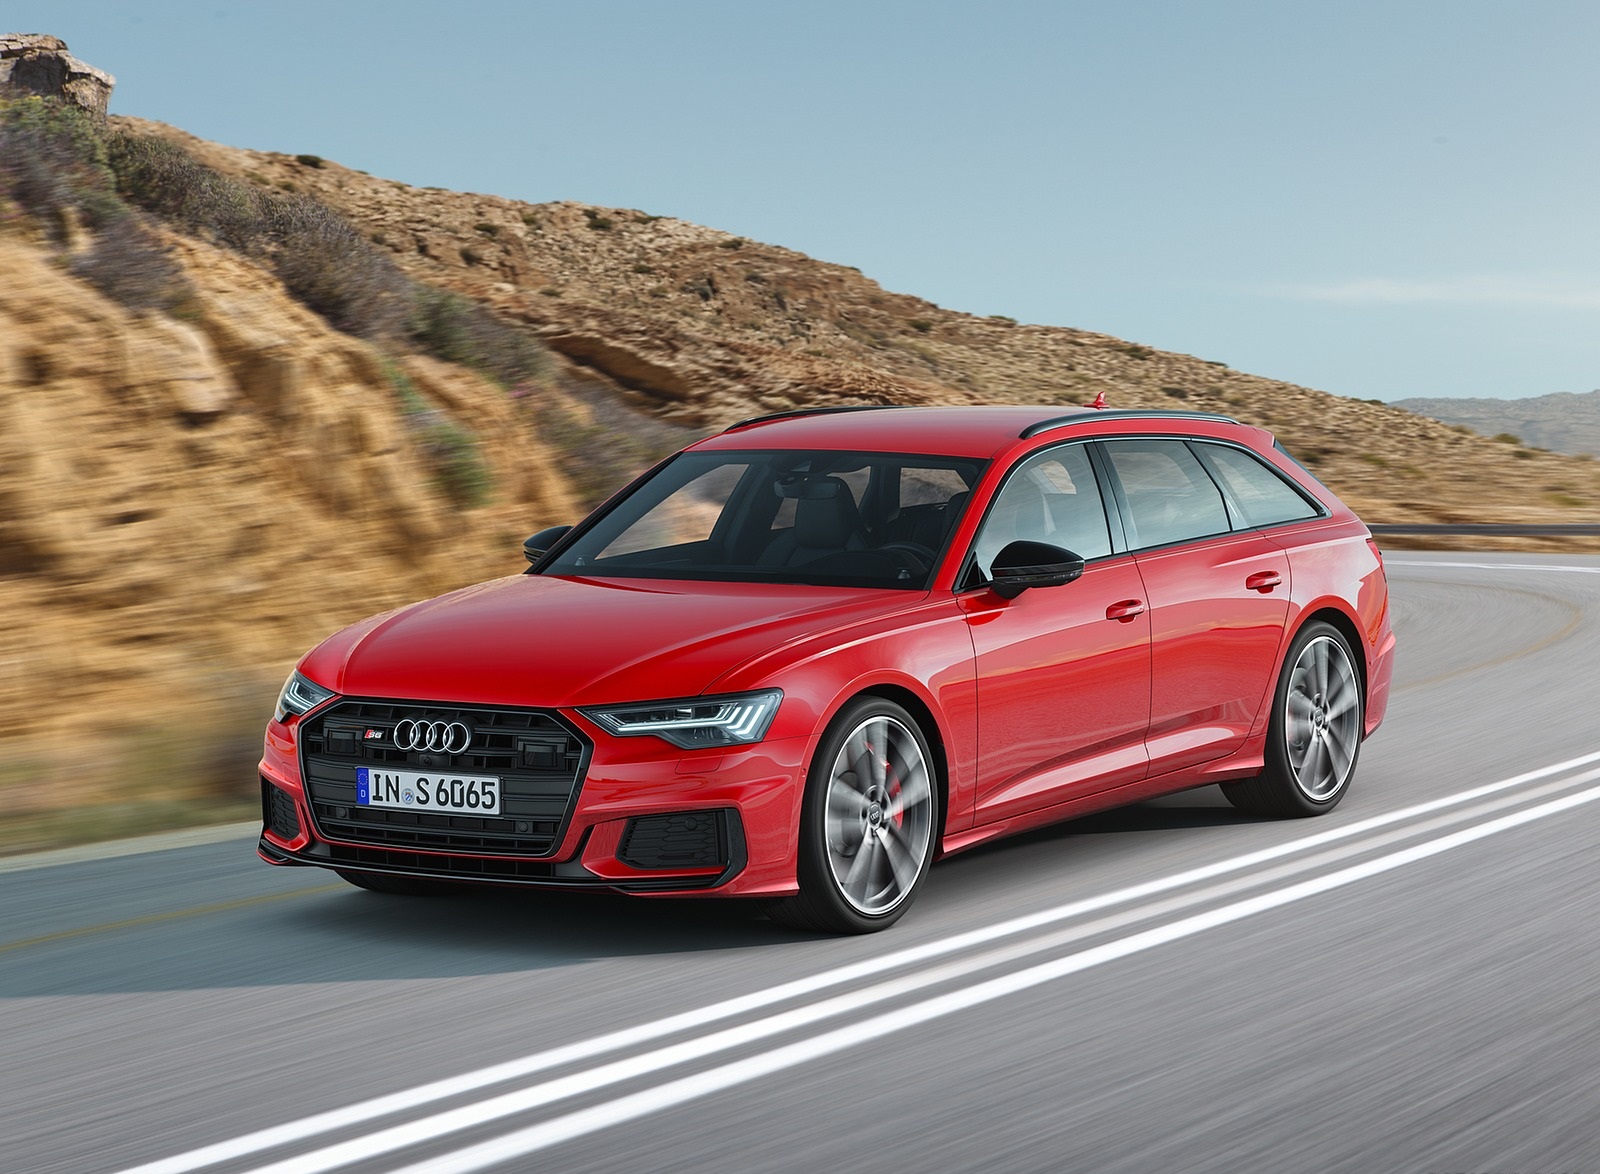 2020 Audi S6 Avant TDI (Color: Tango Red) Front Three-Quarter Wallpapers  #23 of 60